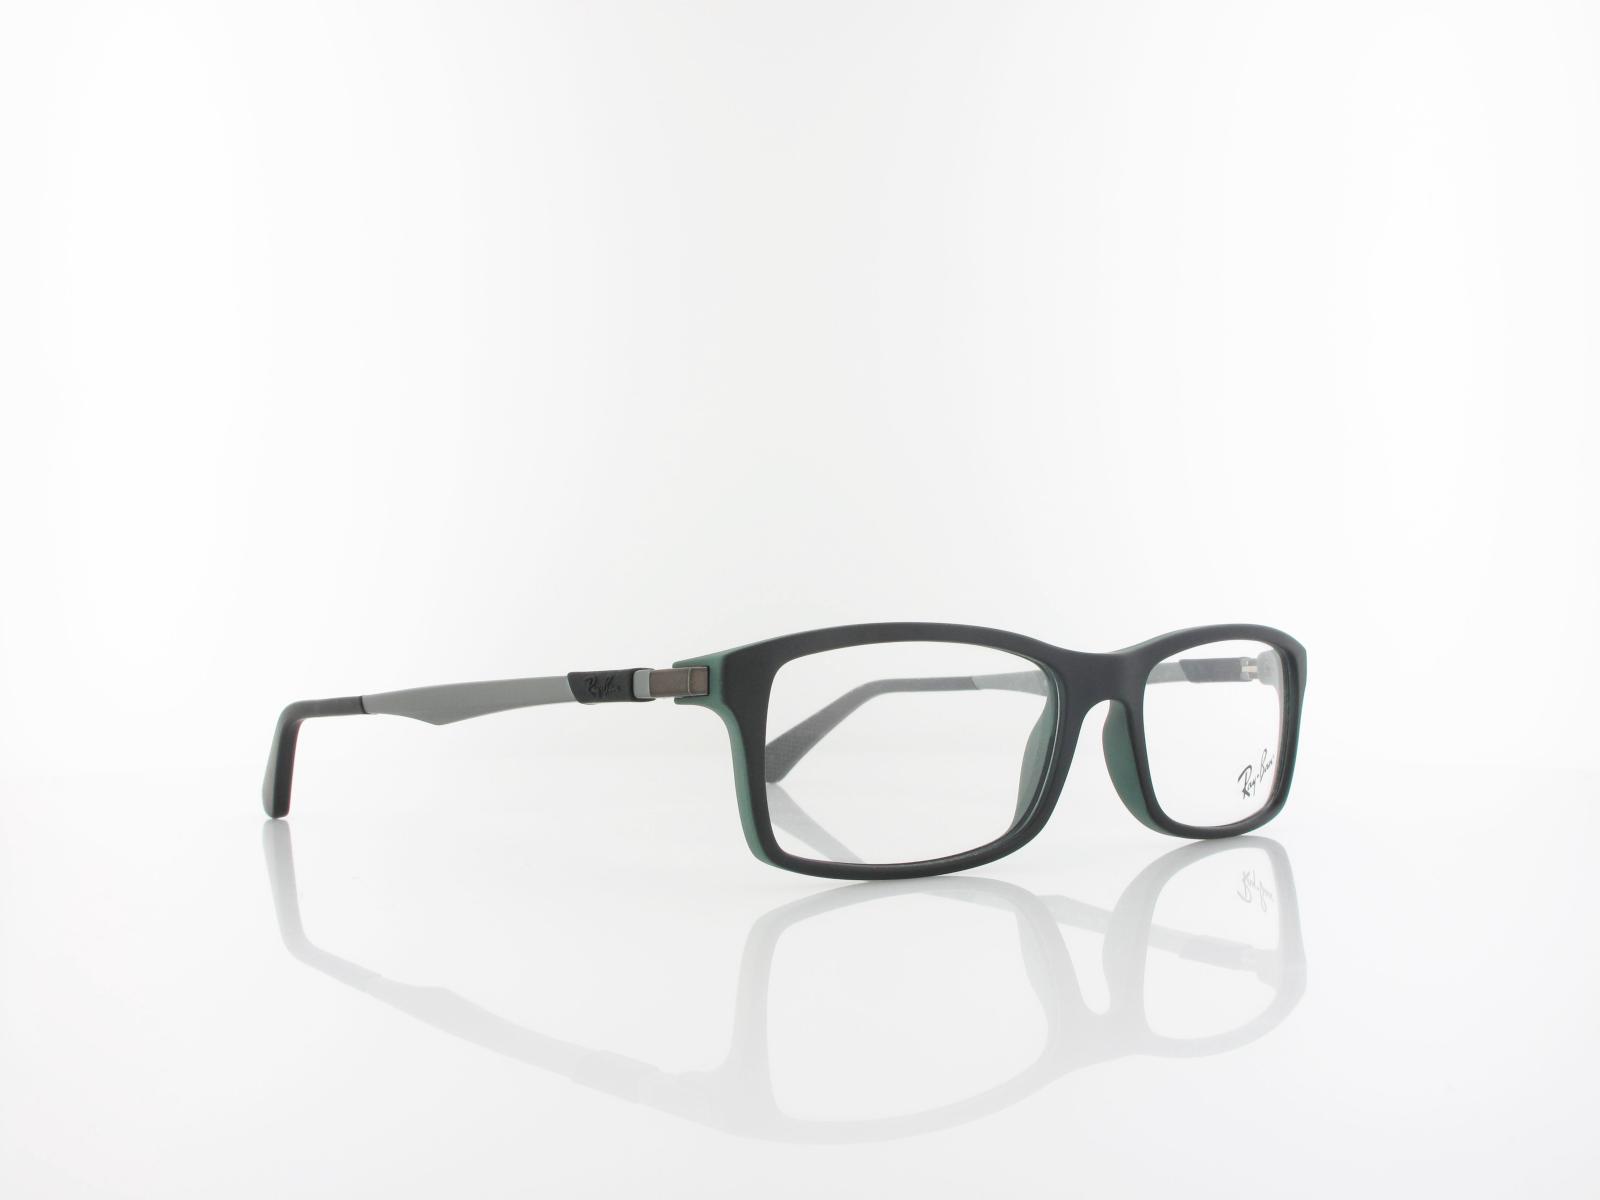 Ray Ban | RX7017 5197 54 | top black on green